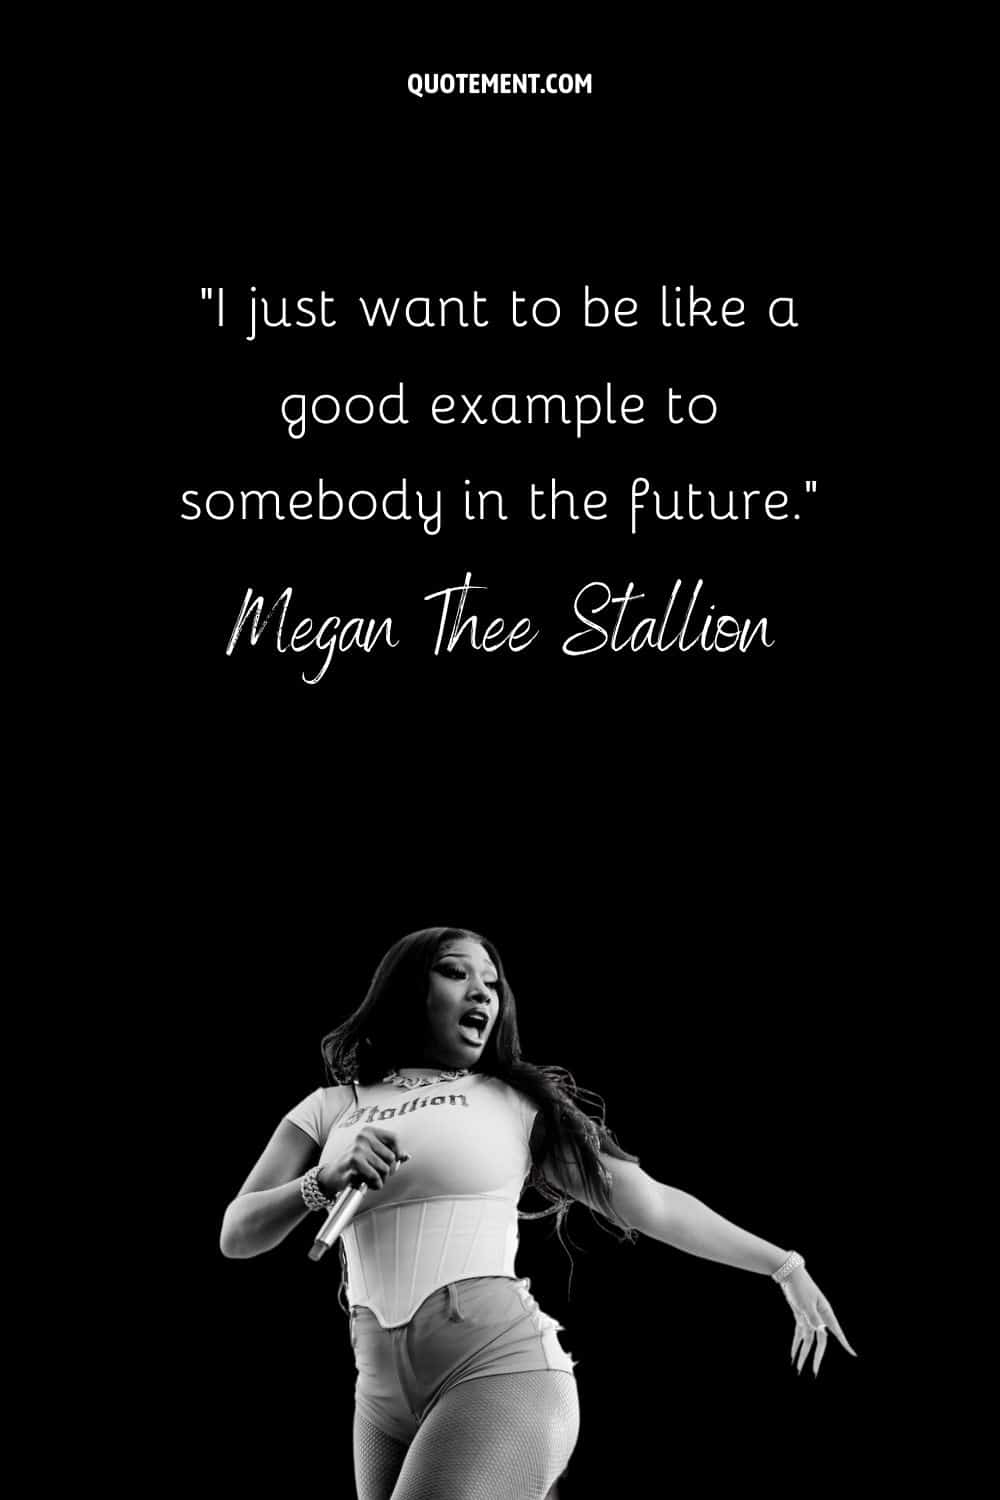 “I just want to be like a good example to somebody in the future.” — Megan Thee Stallion